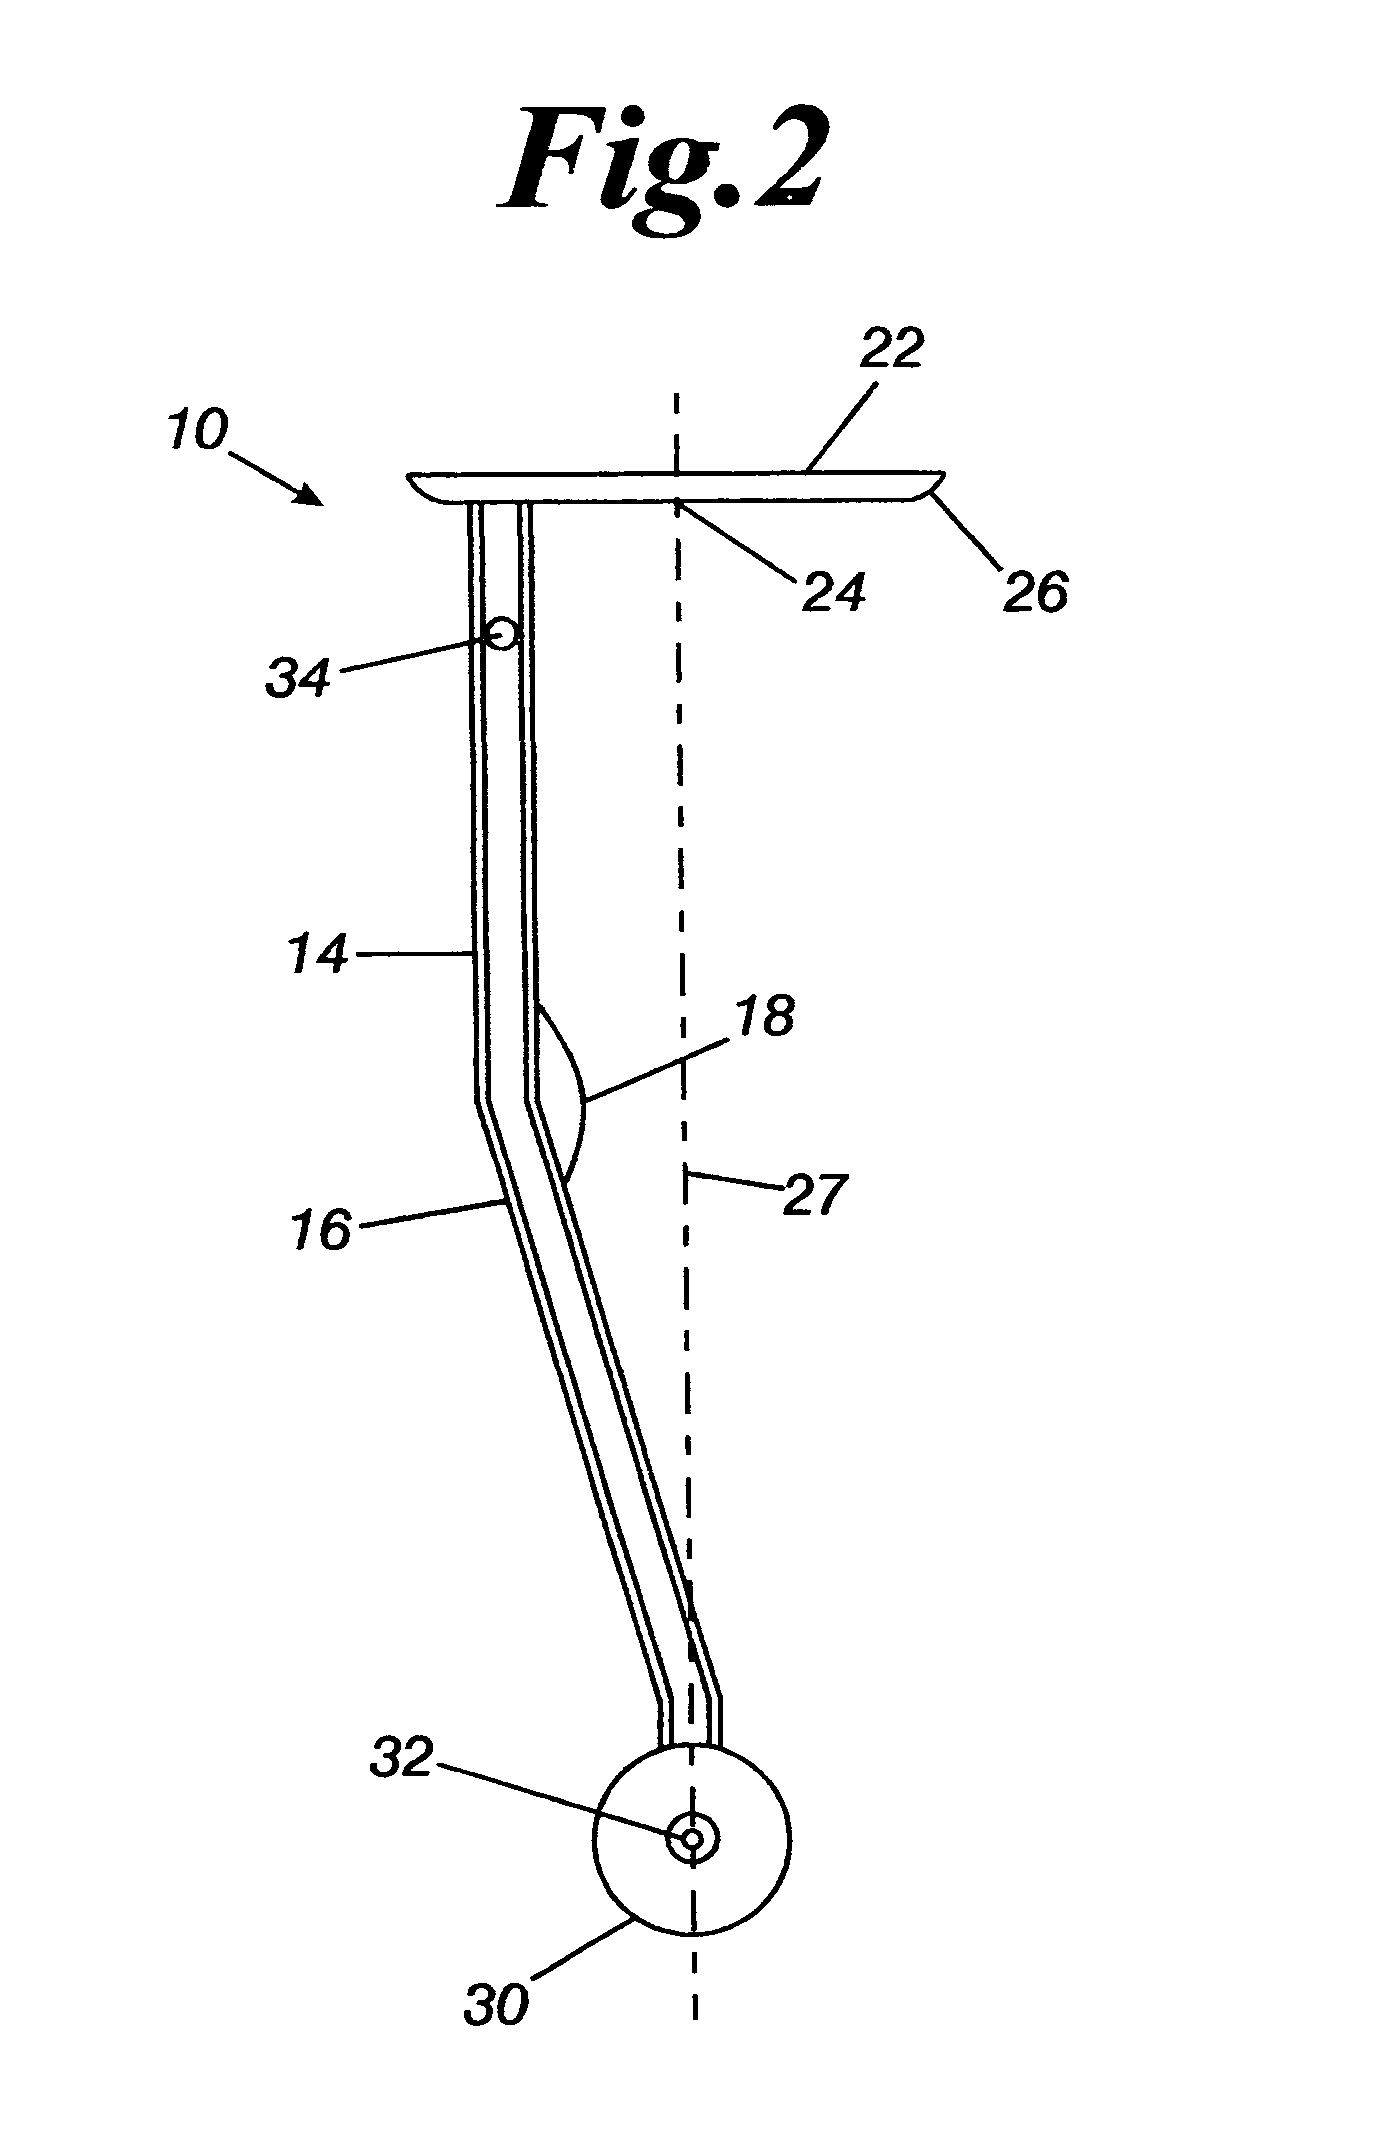 Buoyant apparatus for attachment to beverage insulators holding beverage containers